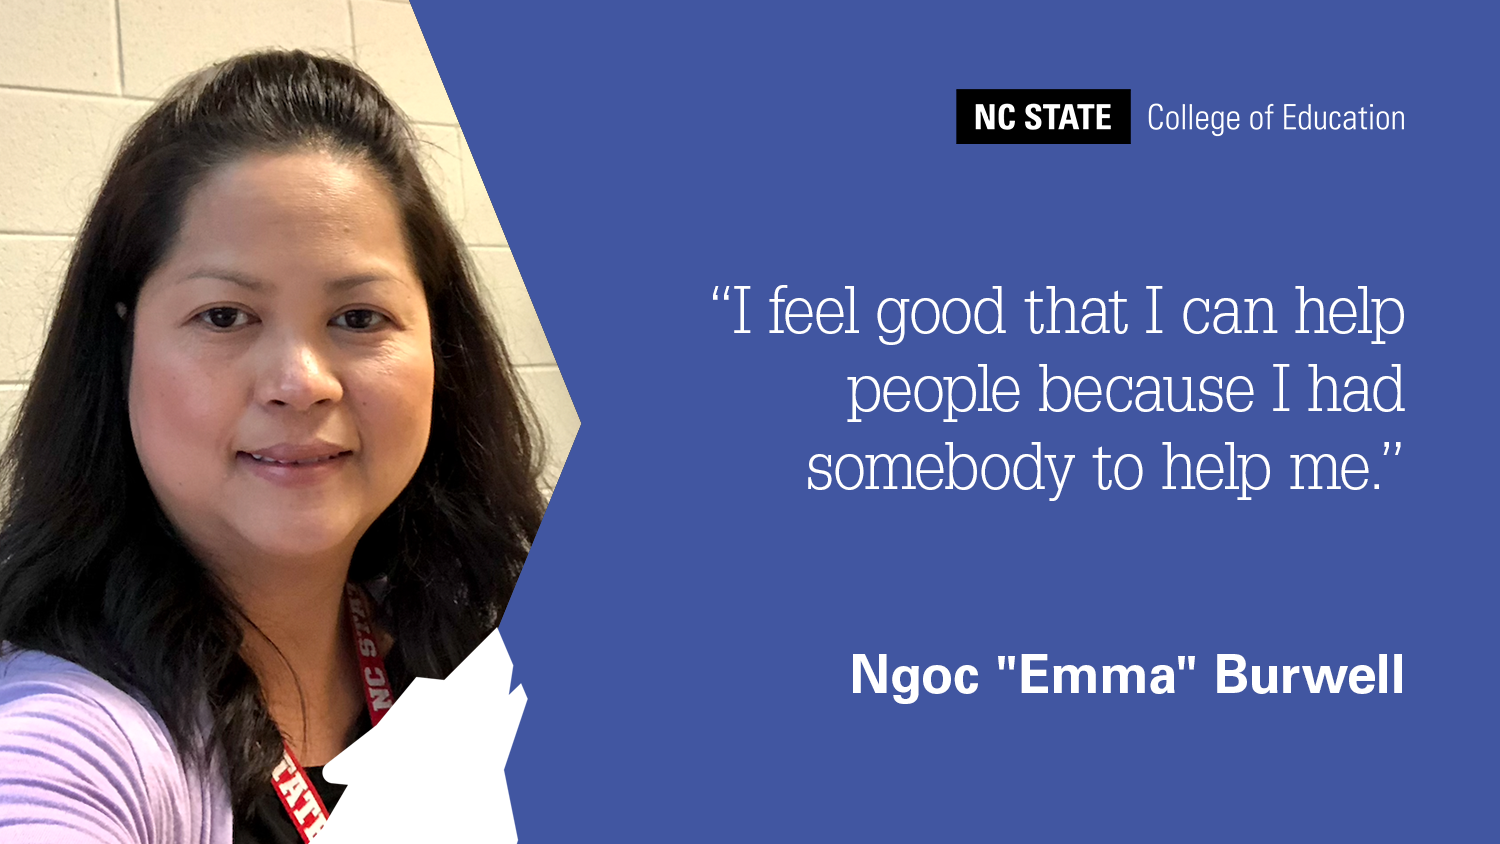 Headshot of Emma "Ngoc" Burwell with graphic text: I feel good that I can help people because I had somebody to help me